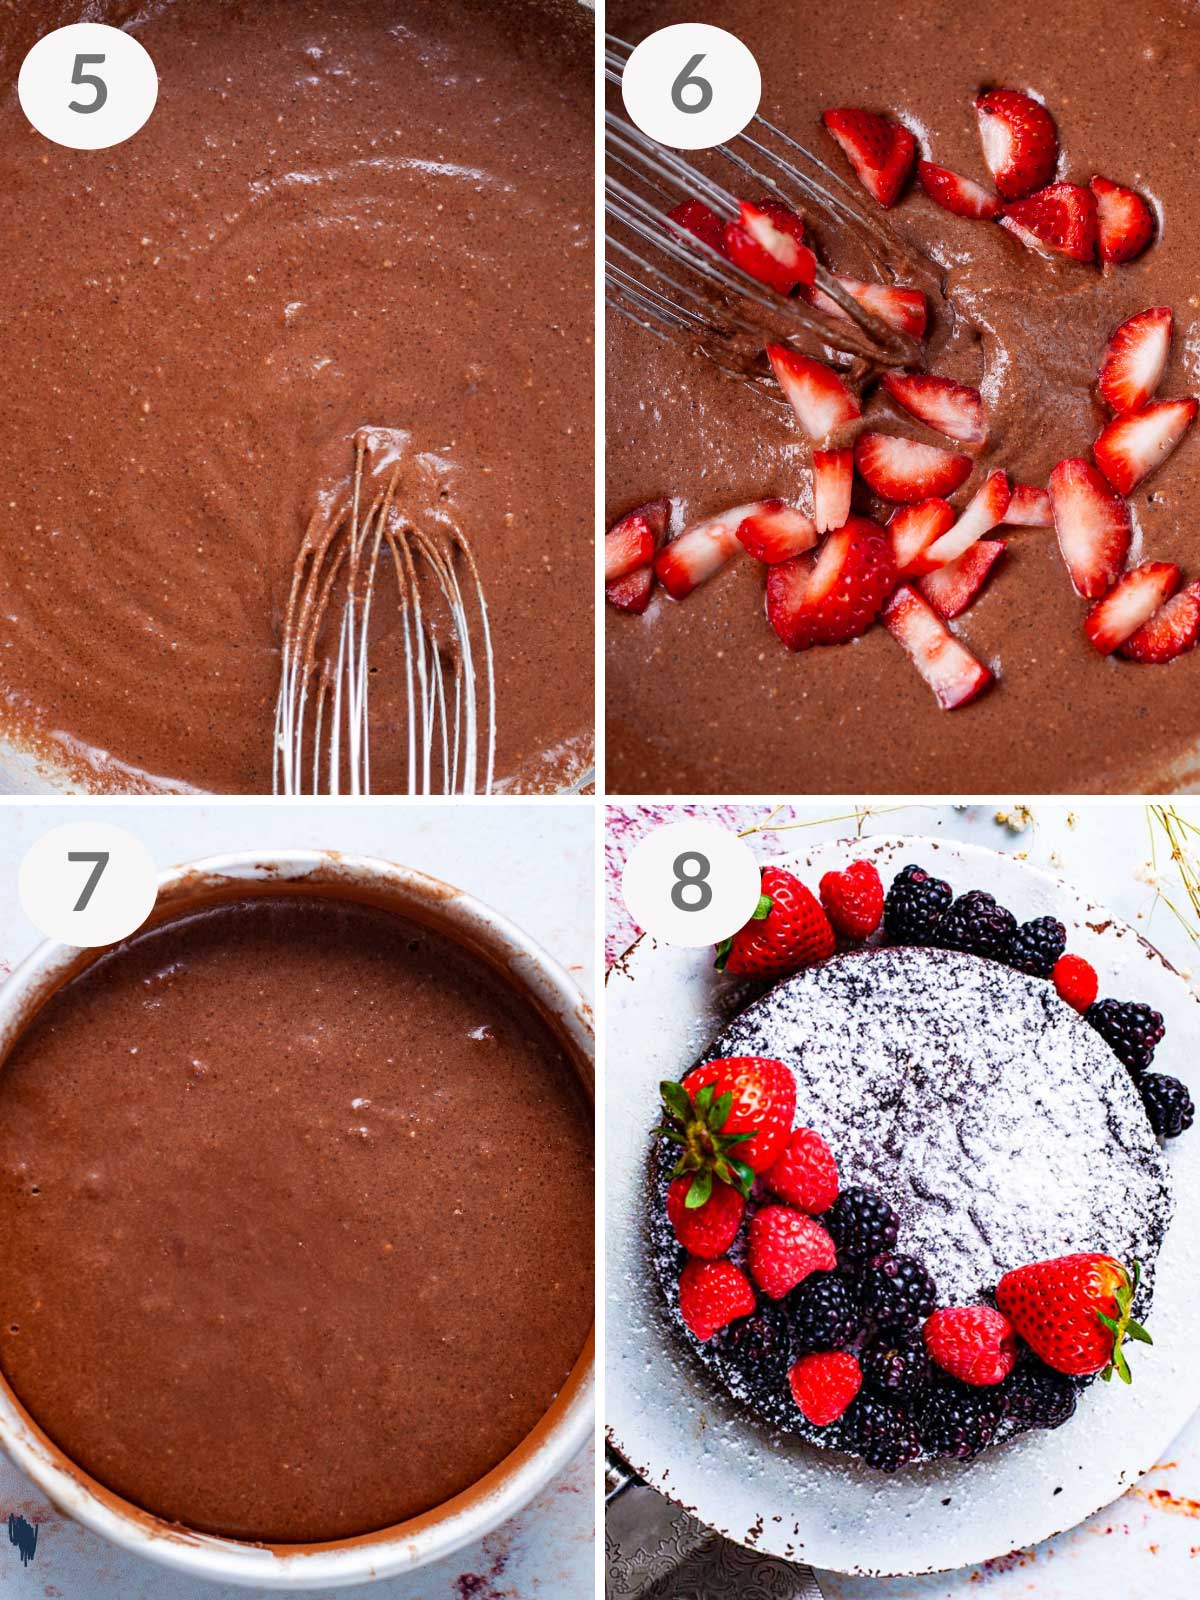 A series of final steps showing how to make an almond flour chocolate cake.